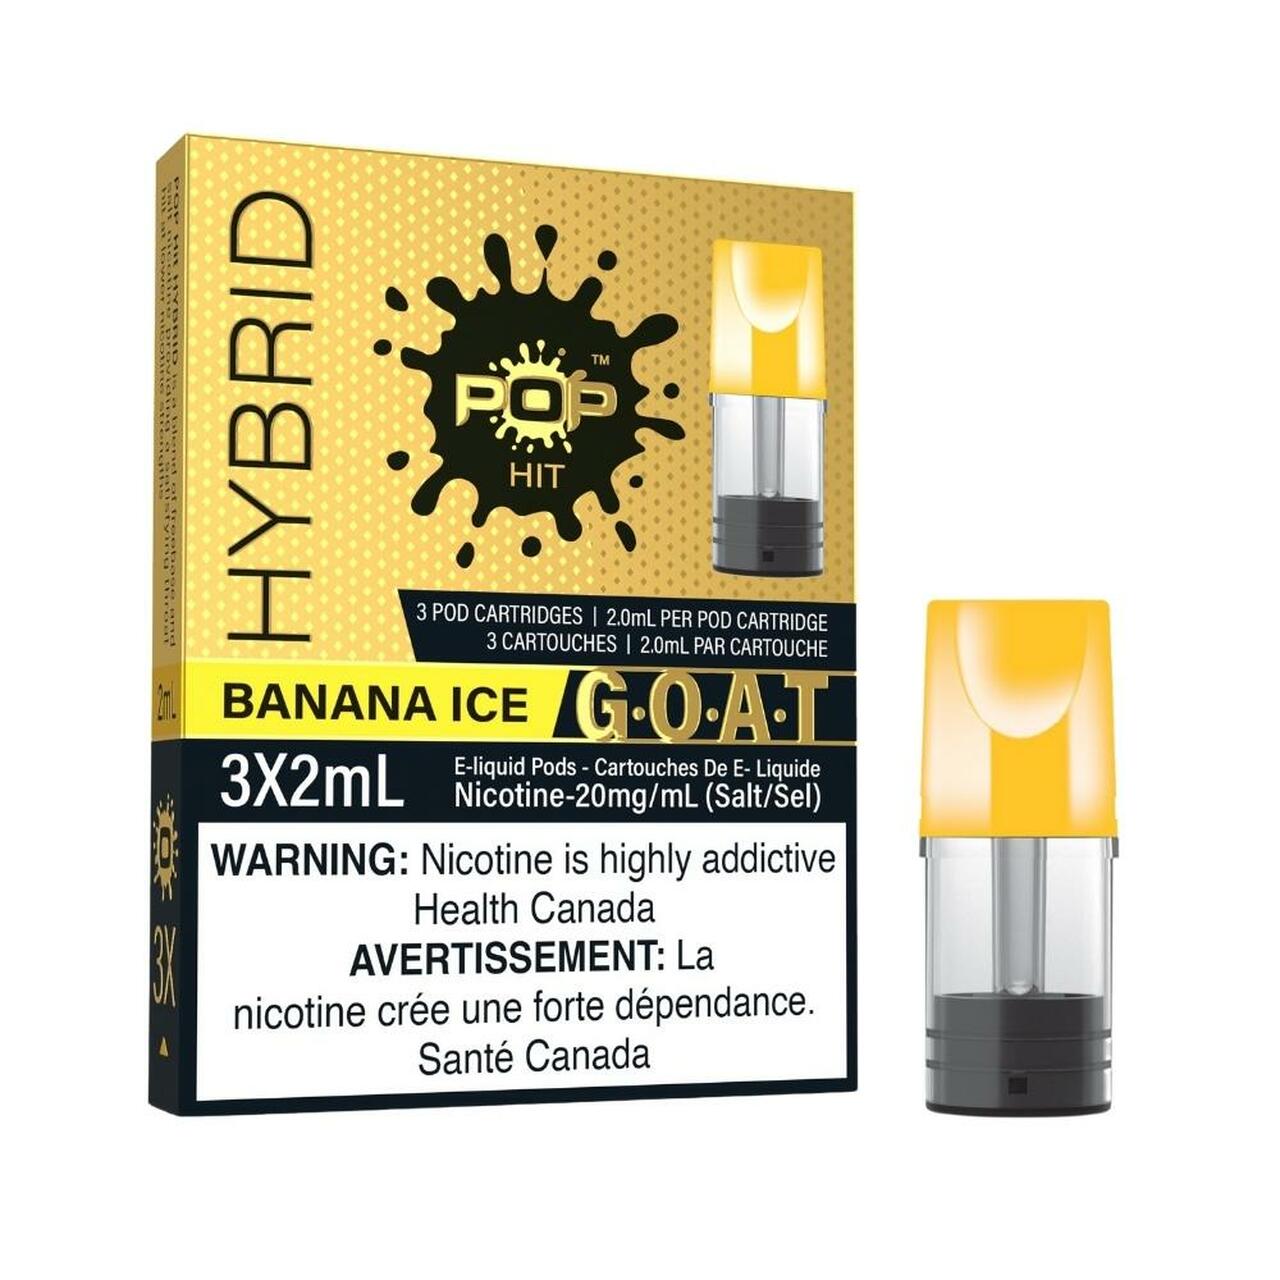 BANANA ICE G.O.A.T SERIES - POP HYBRID STLTH COMPATIBLE PODS